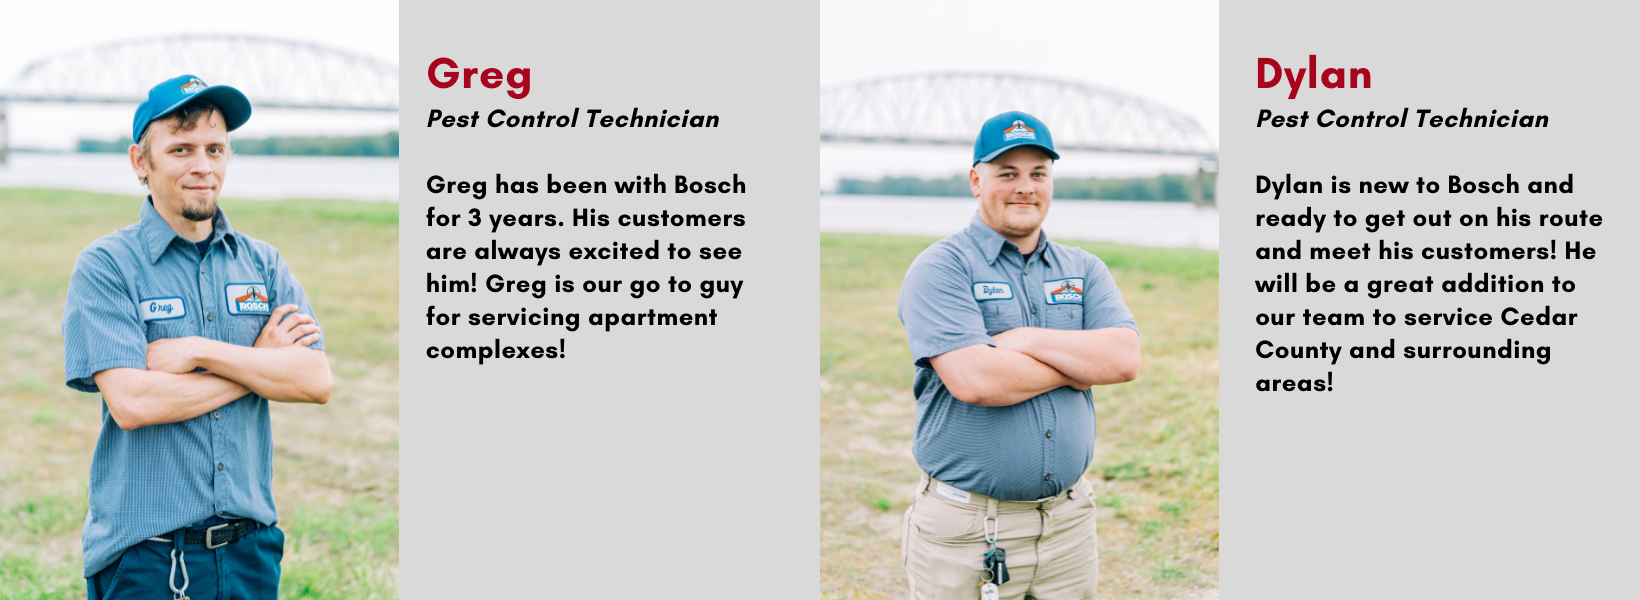 Rick Pest Control Technician Specialized in Rodent Control and Wild Life (11)